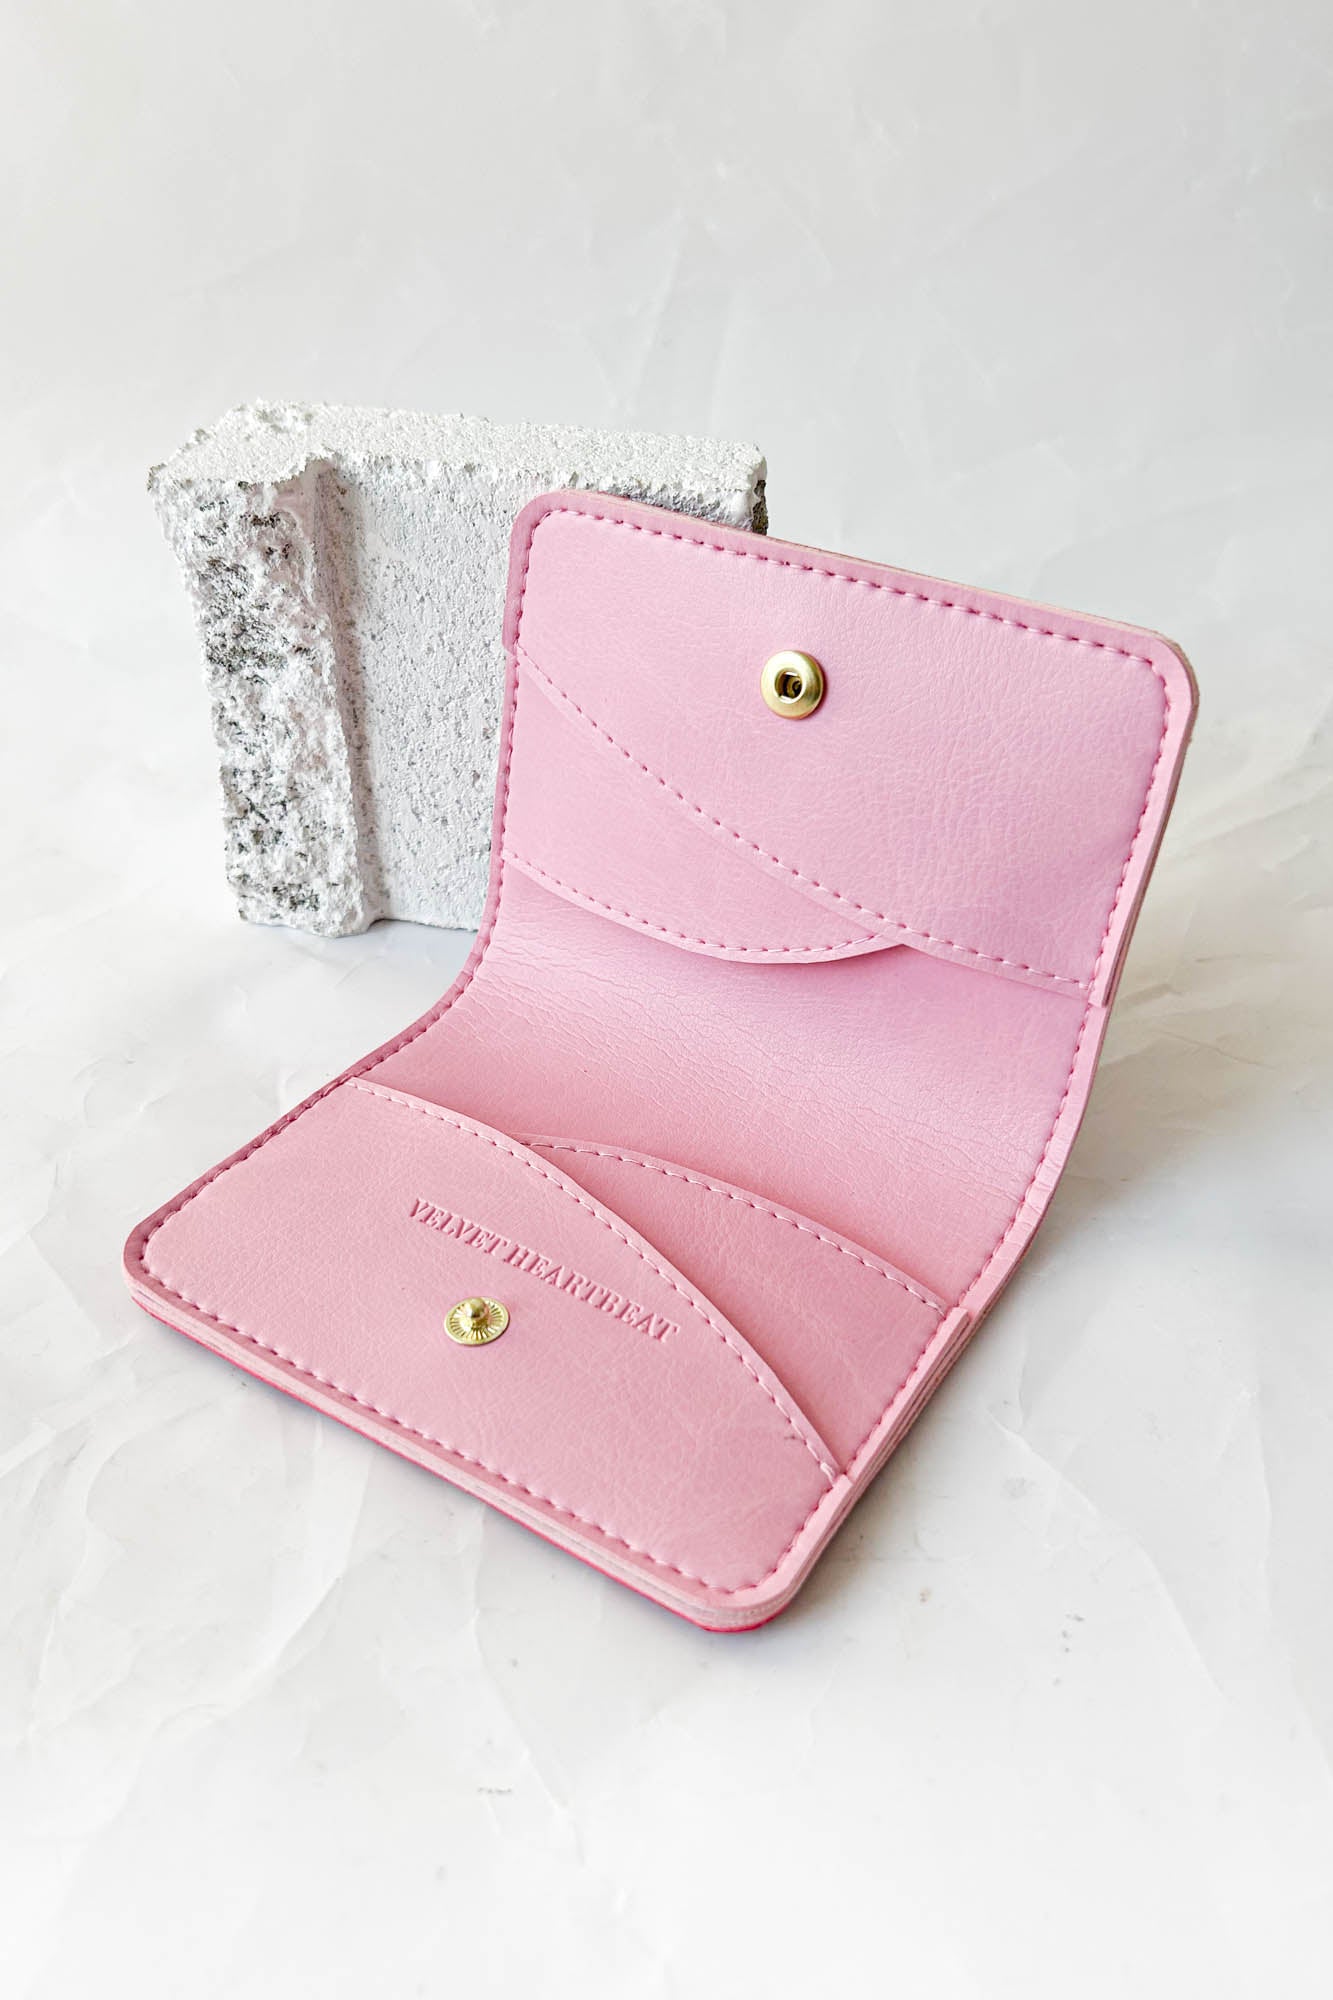 Vegan Leather Wallet - Pink and Cherry